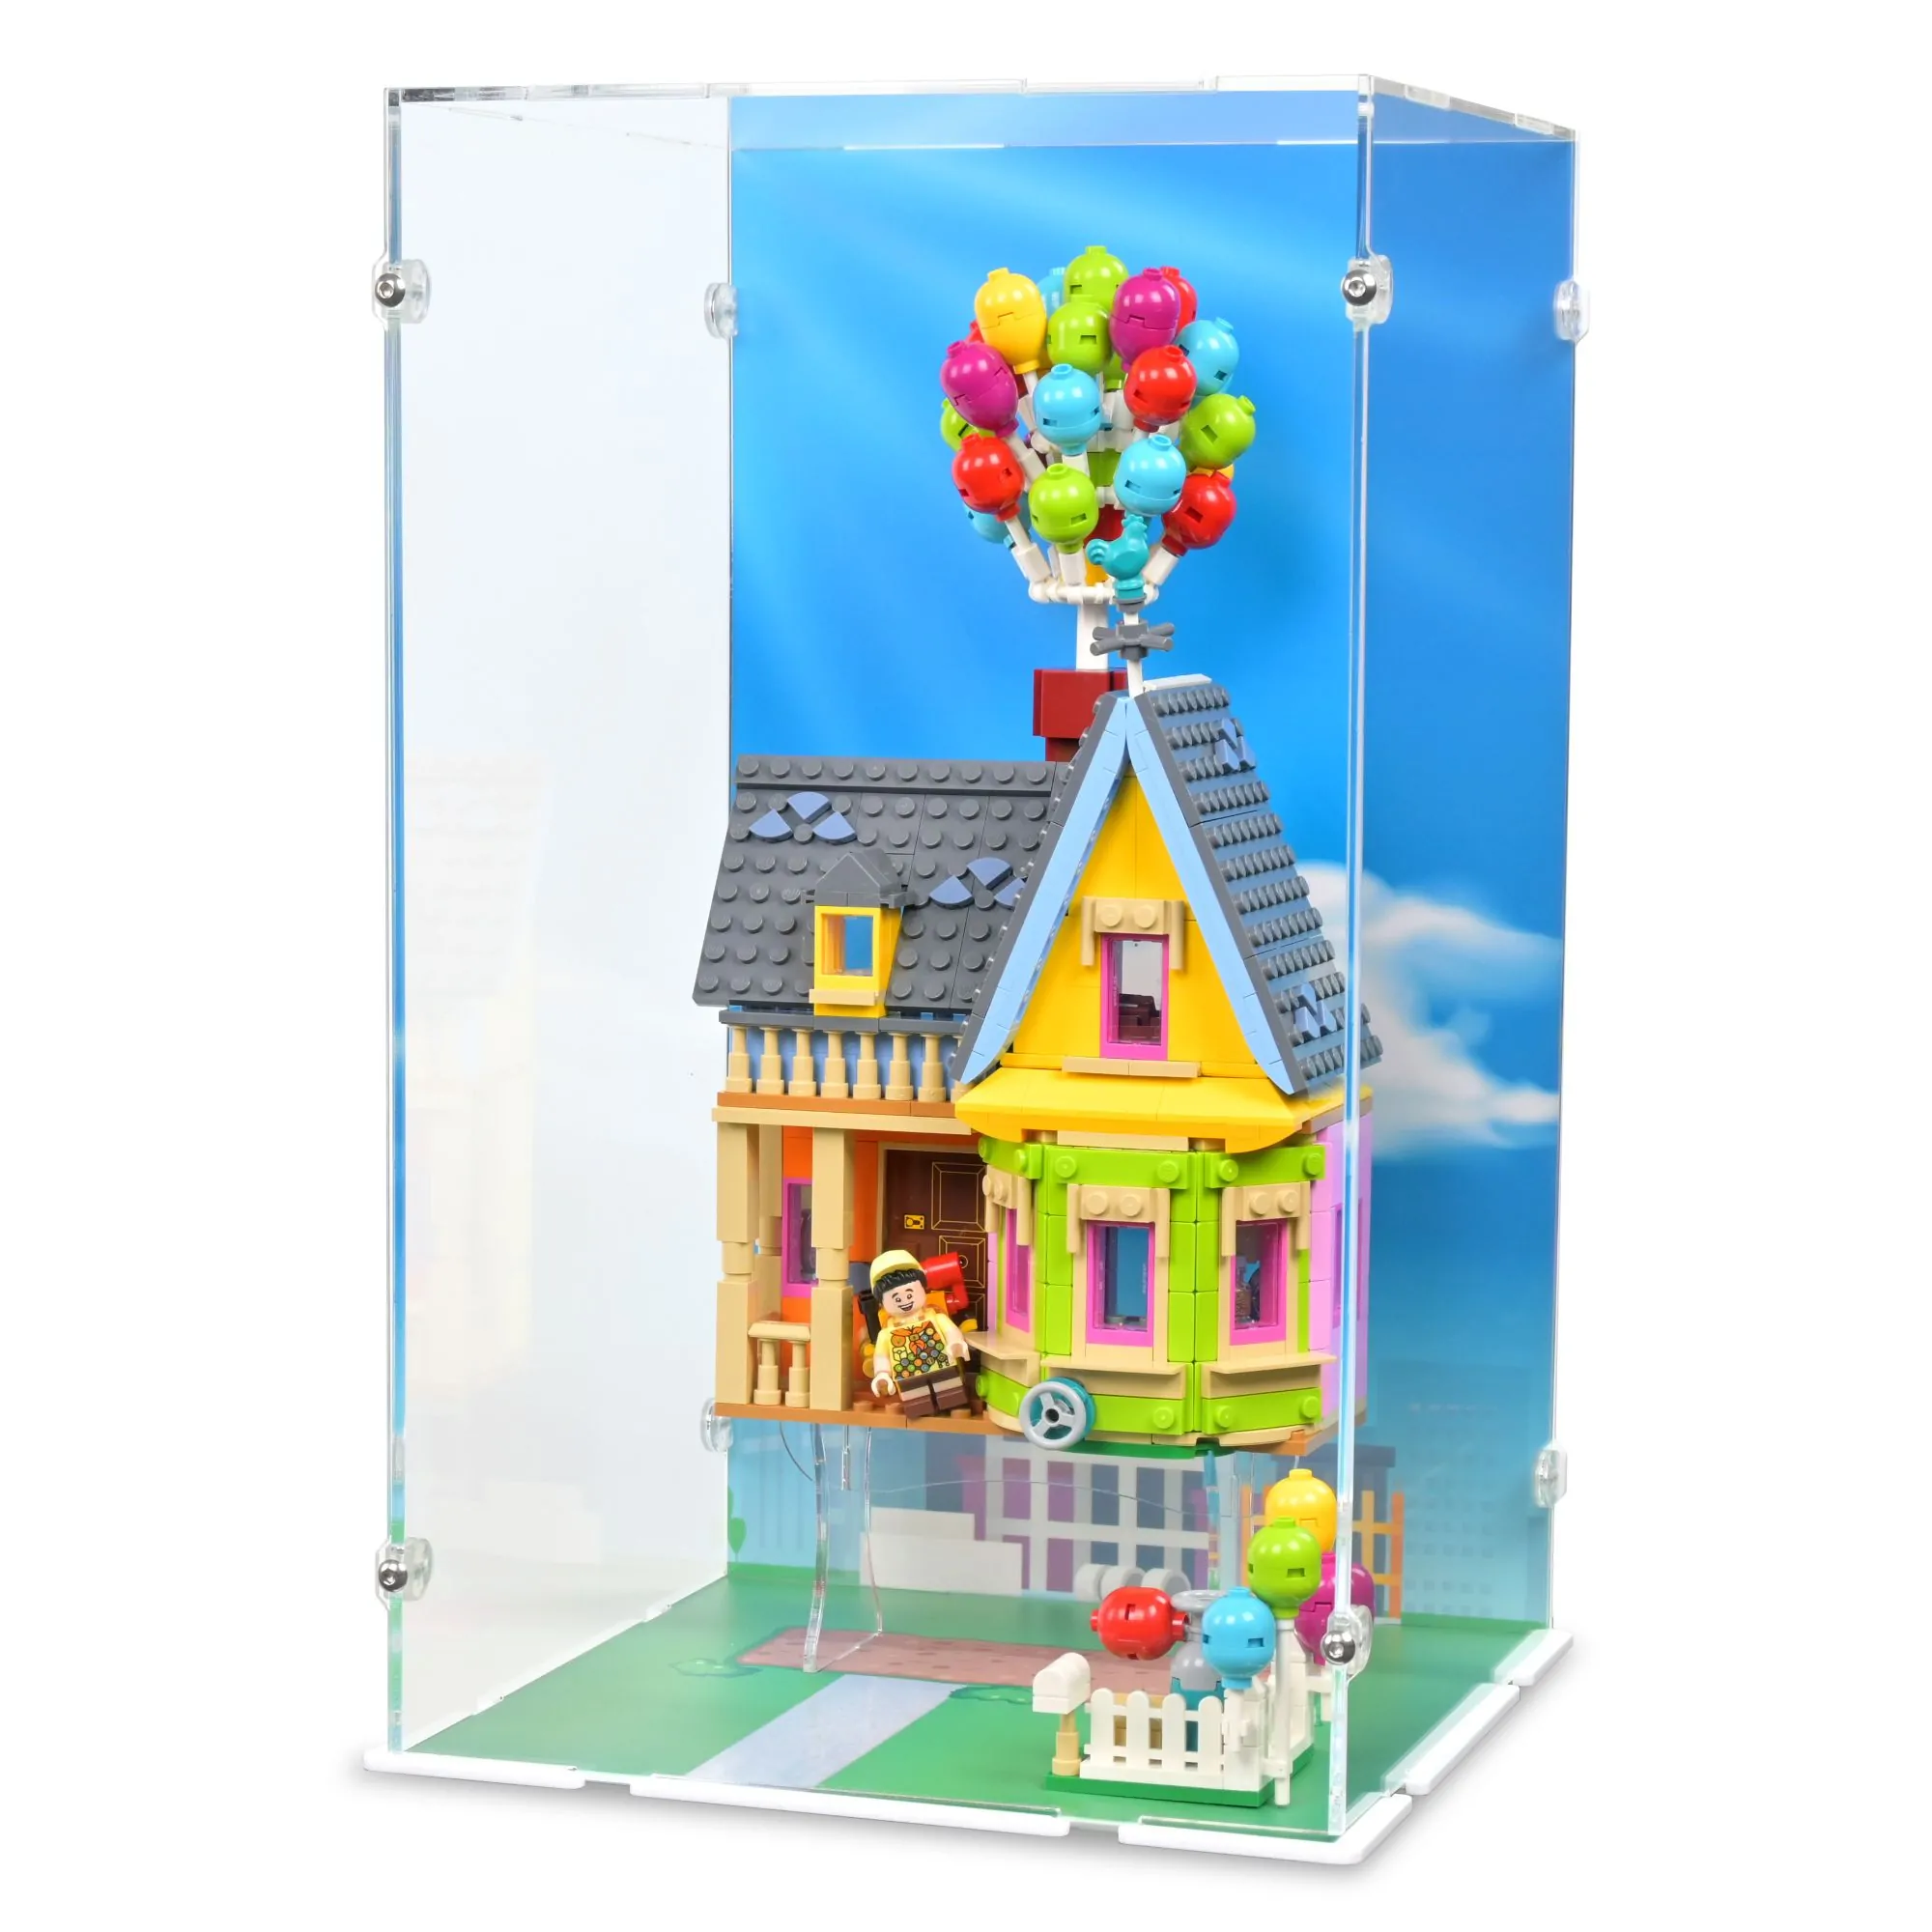 Lego® Instructions - House from Up (Disney-Pixar)